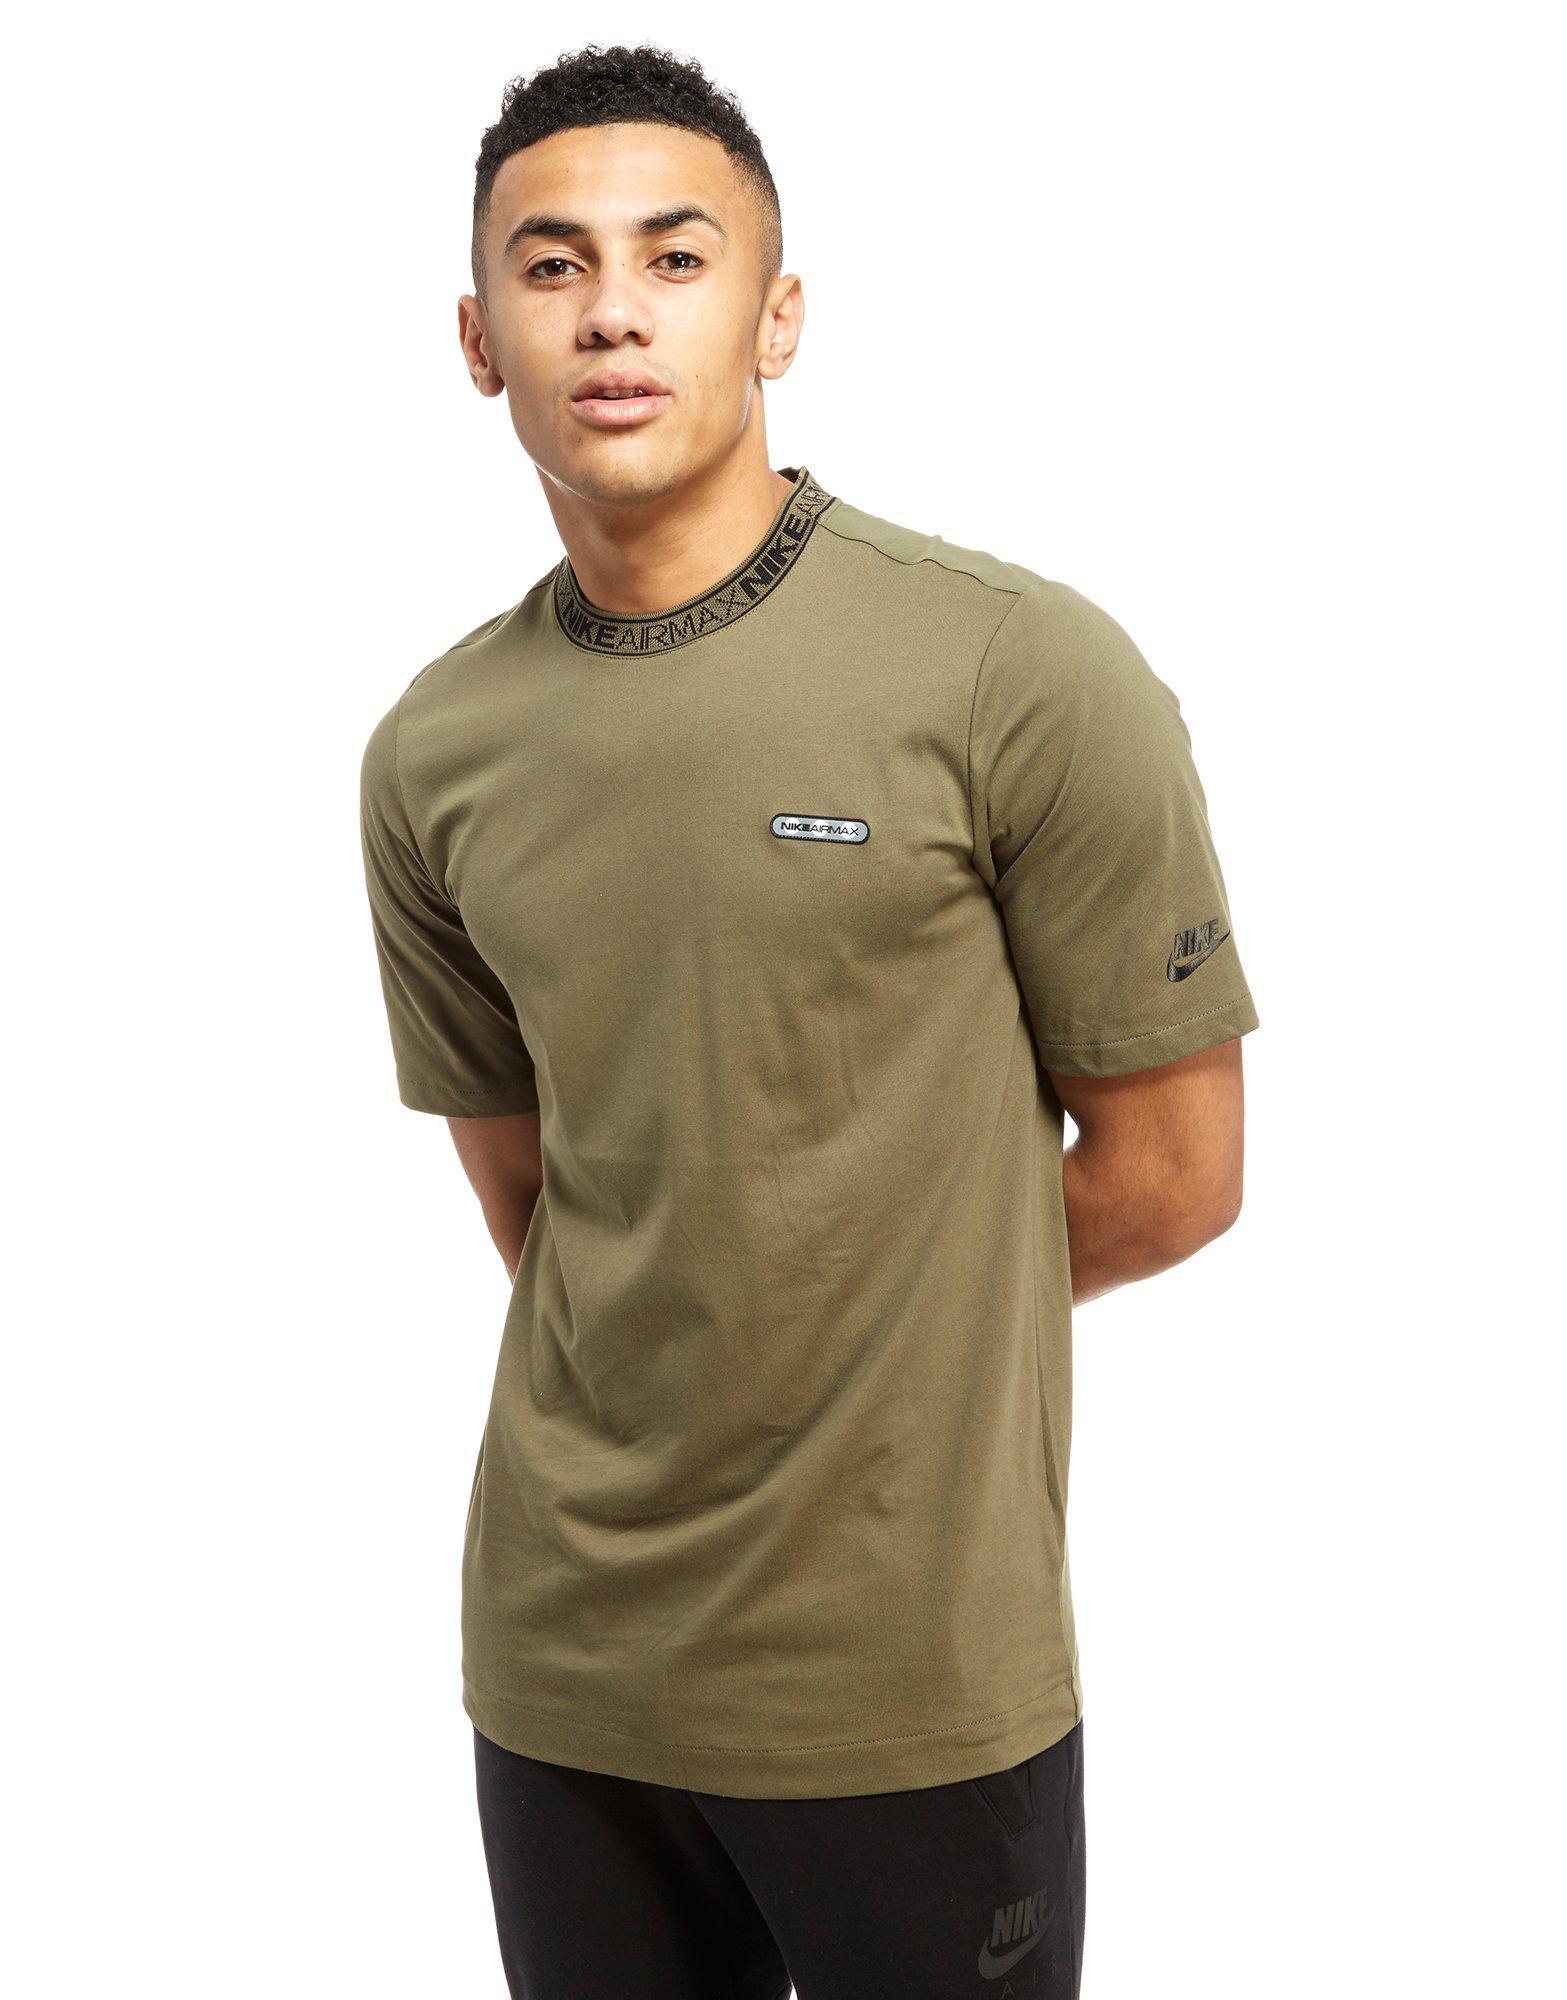 Nike Synthetic Max Jacquard T-shirt in Olive (Green) for Men - Lyst